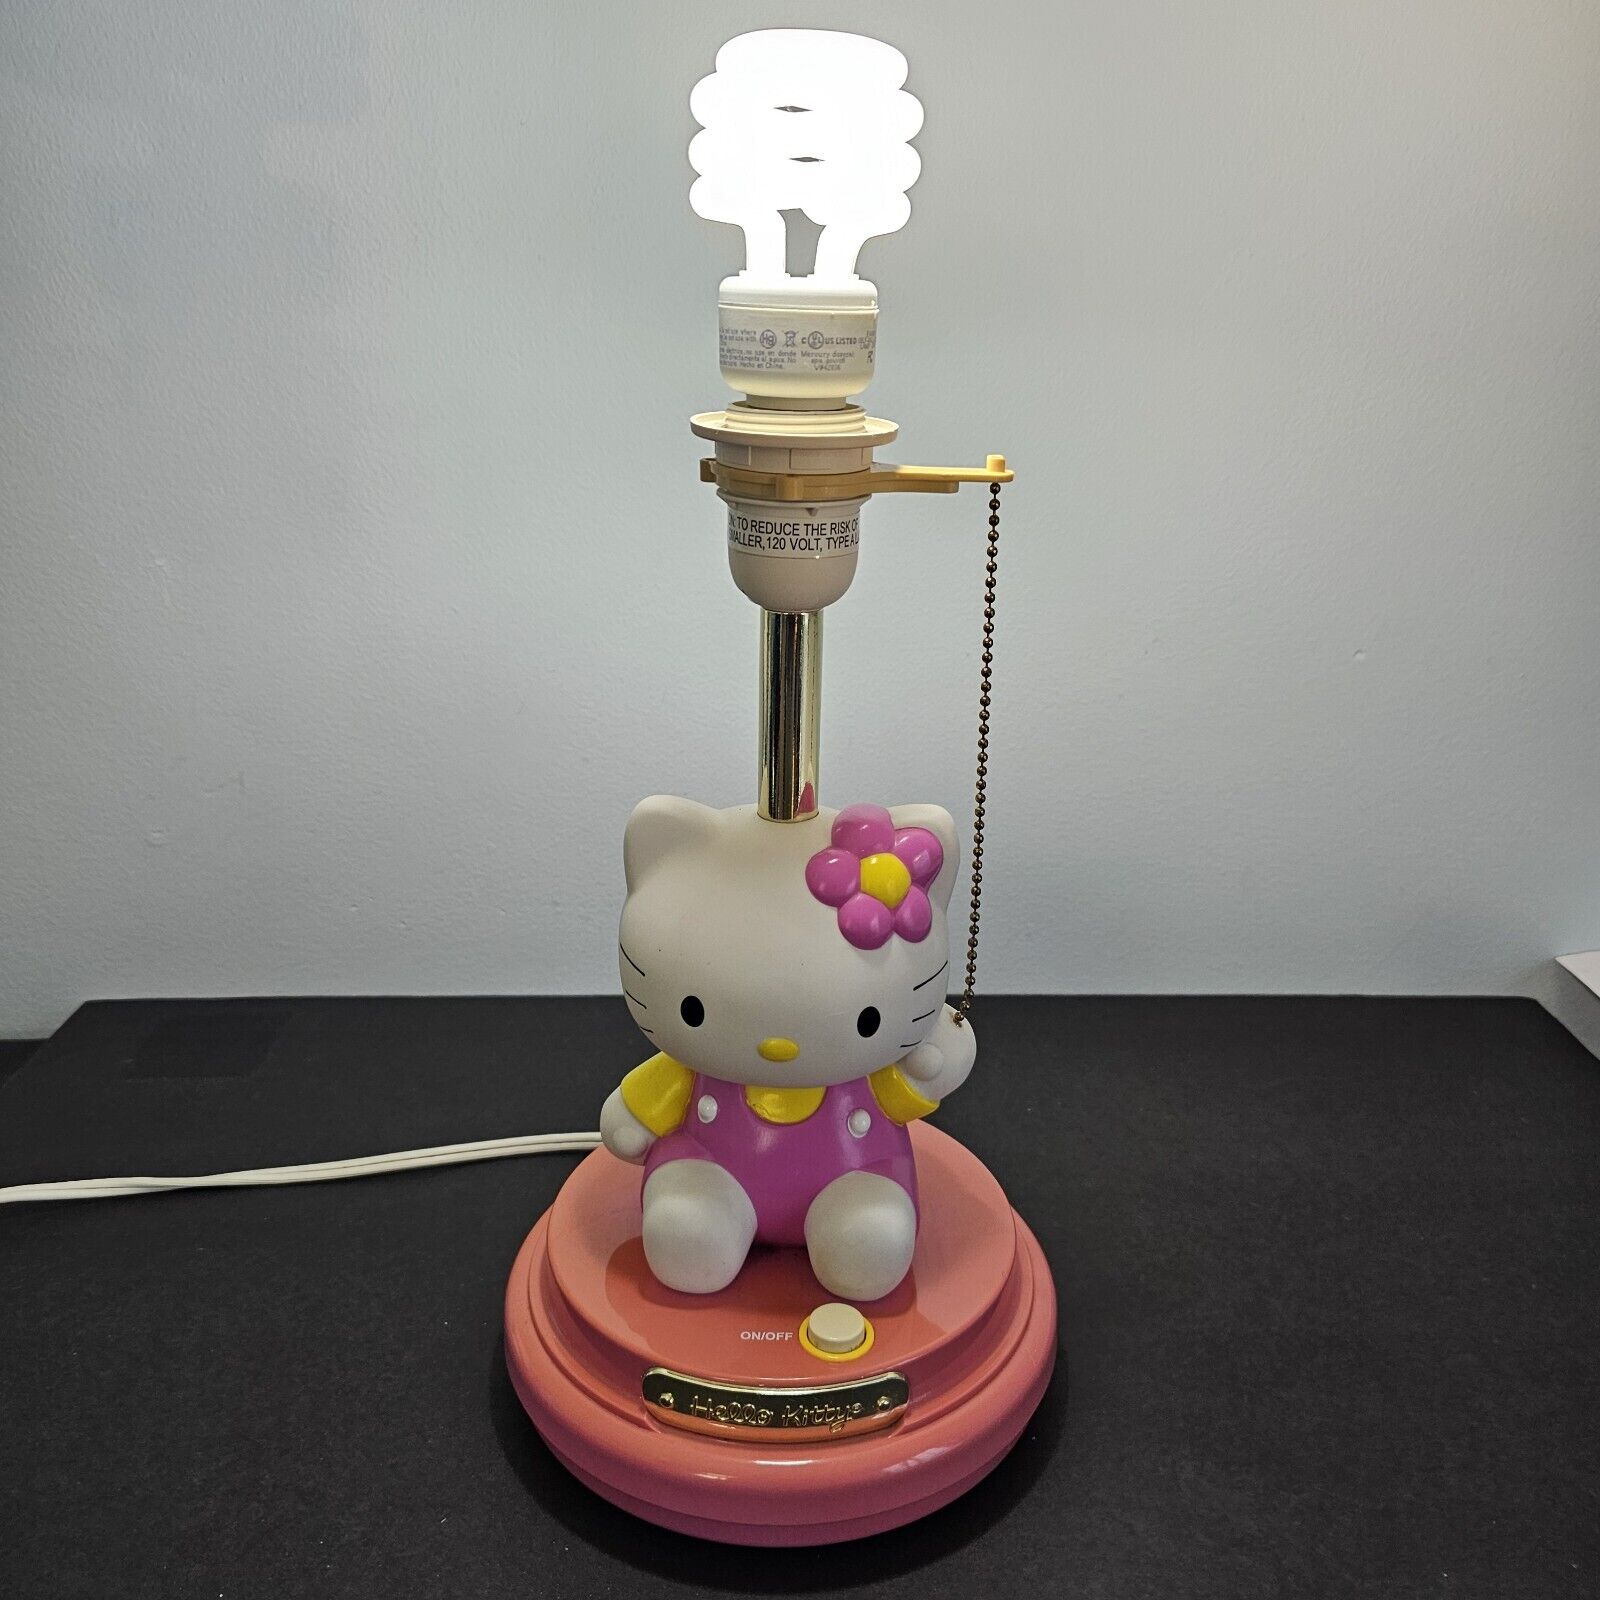 Sanrio Hello Kitty Table Lamp 2007 (Shade and Lightbulb not included) - WORKS